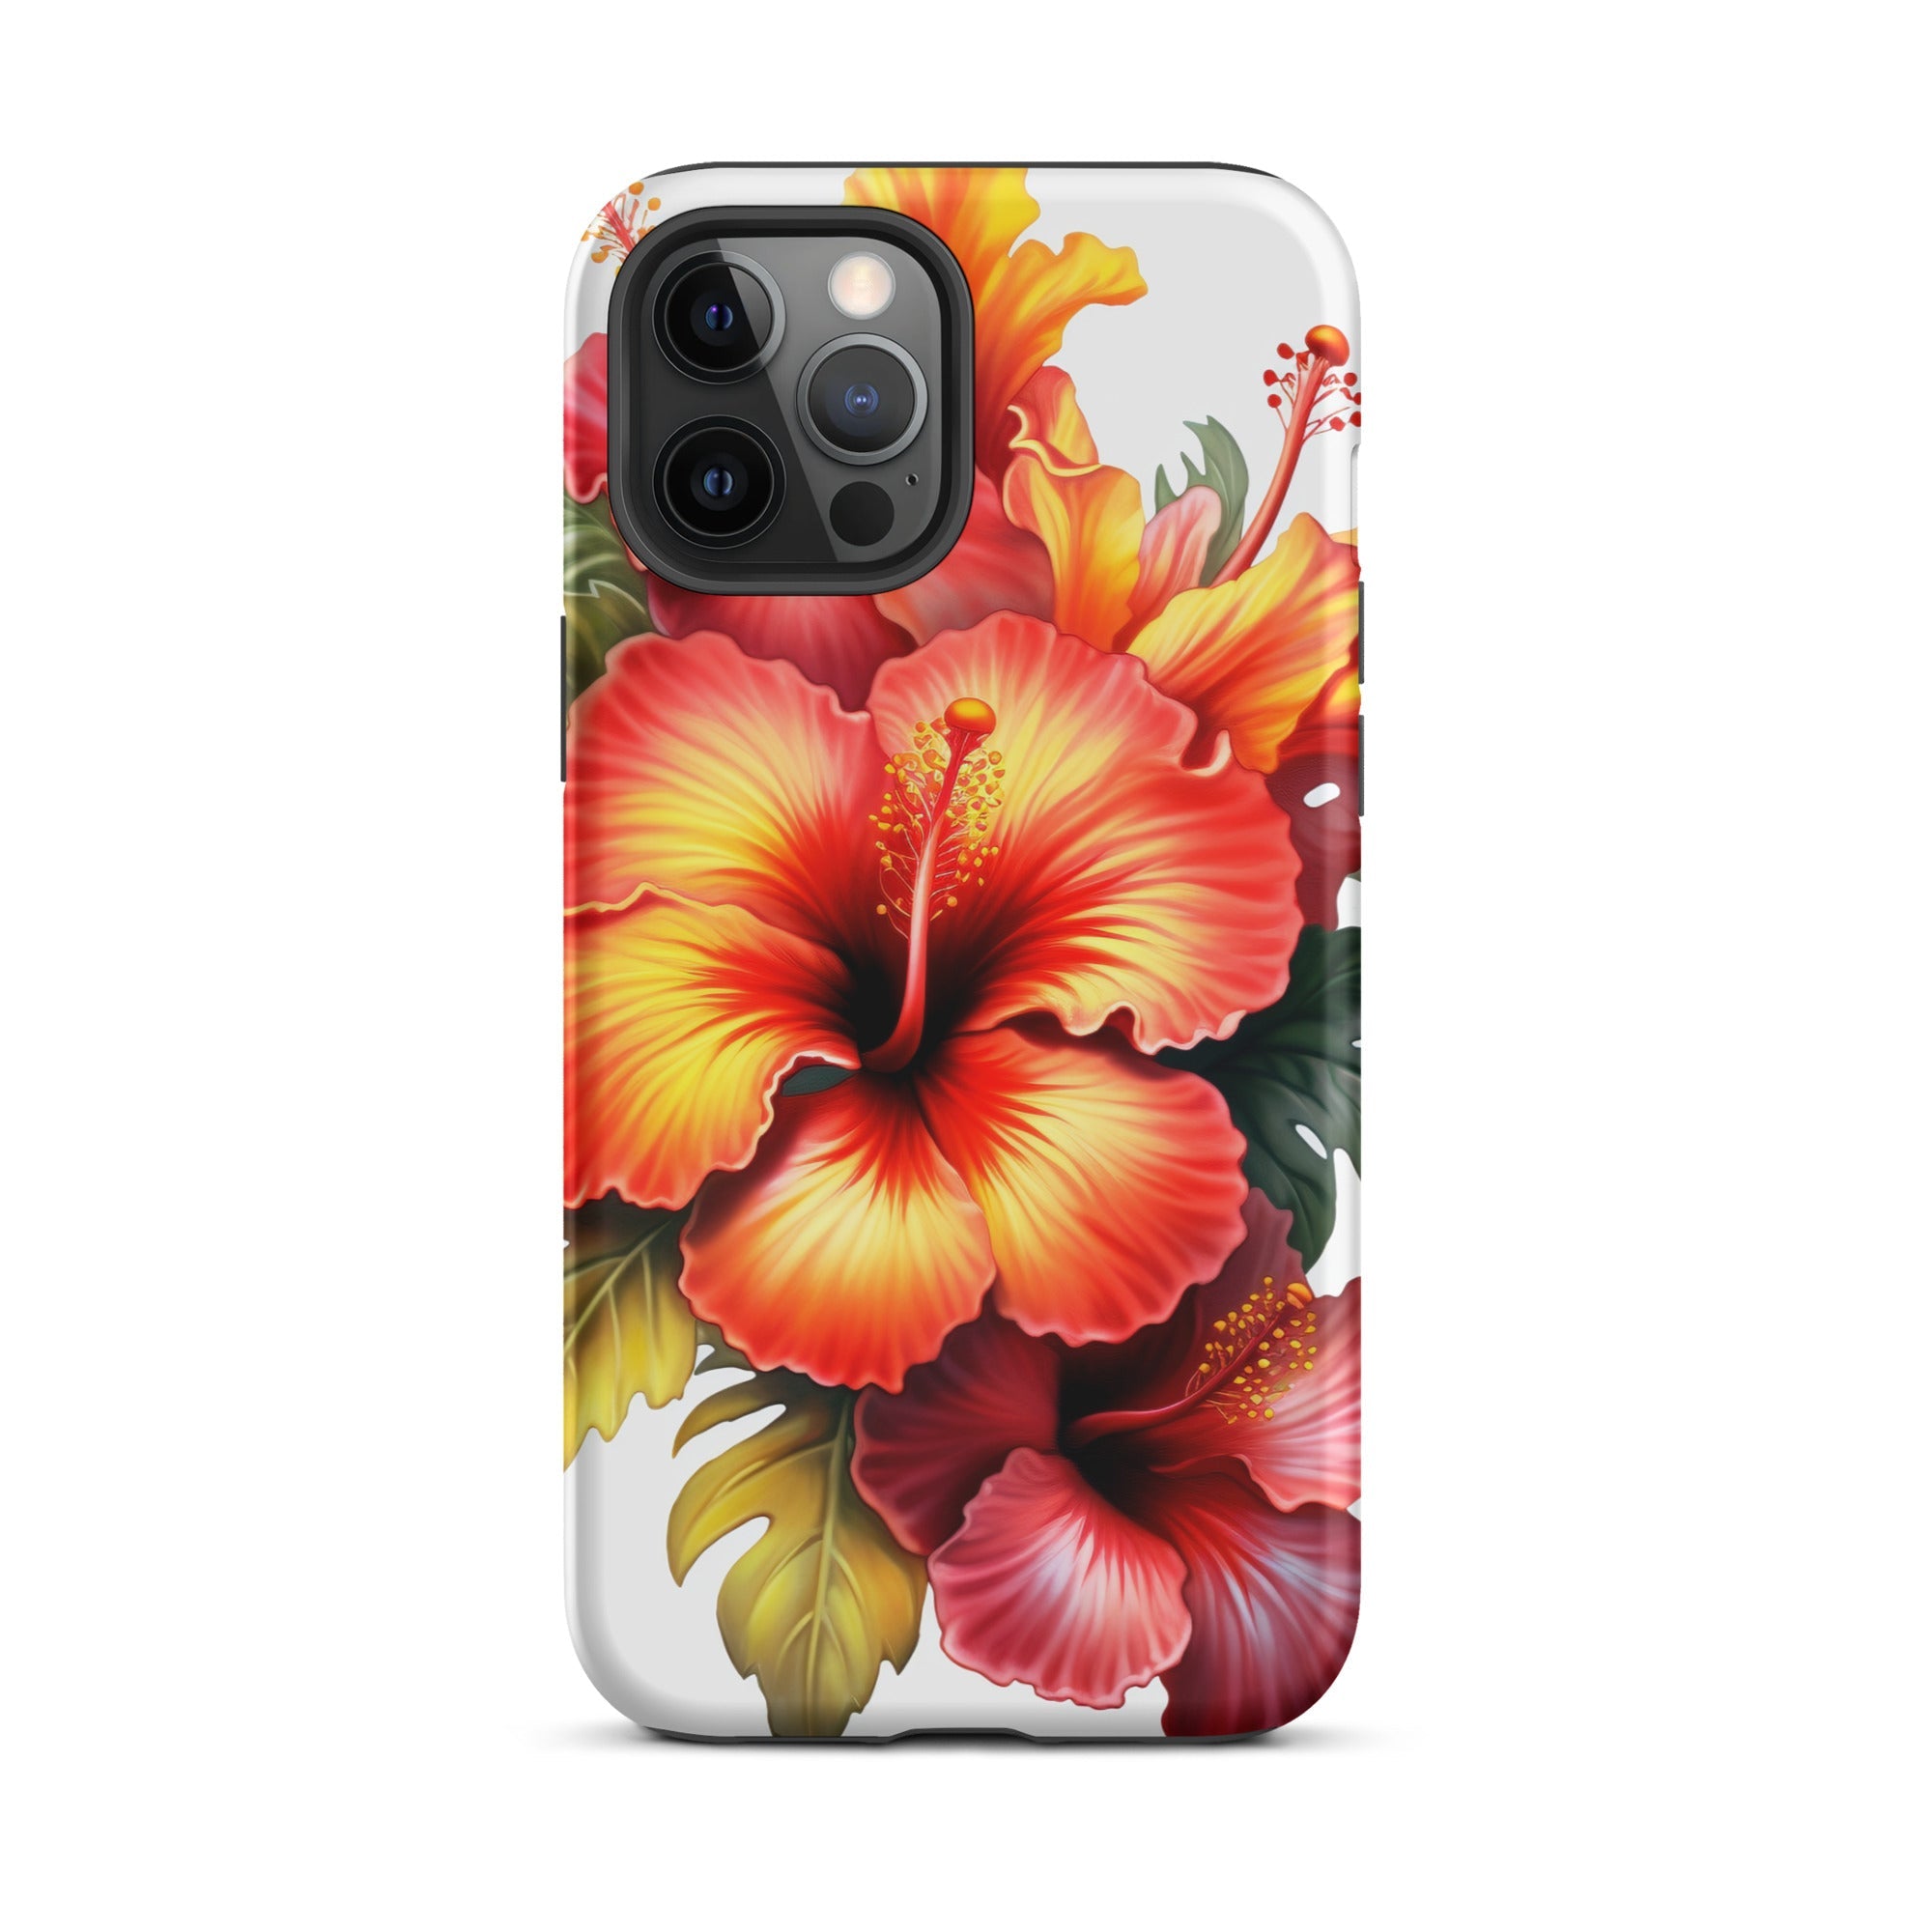 Hibiscus Flower iPhone Case by Visual Verse - Image 14